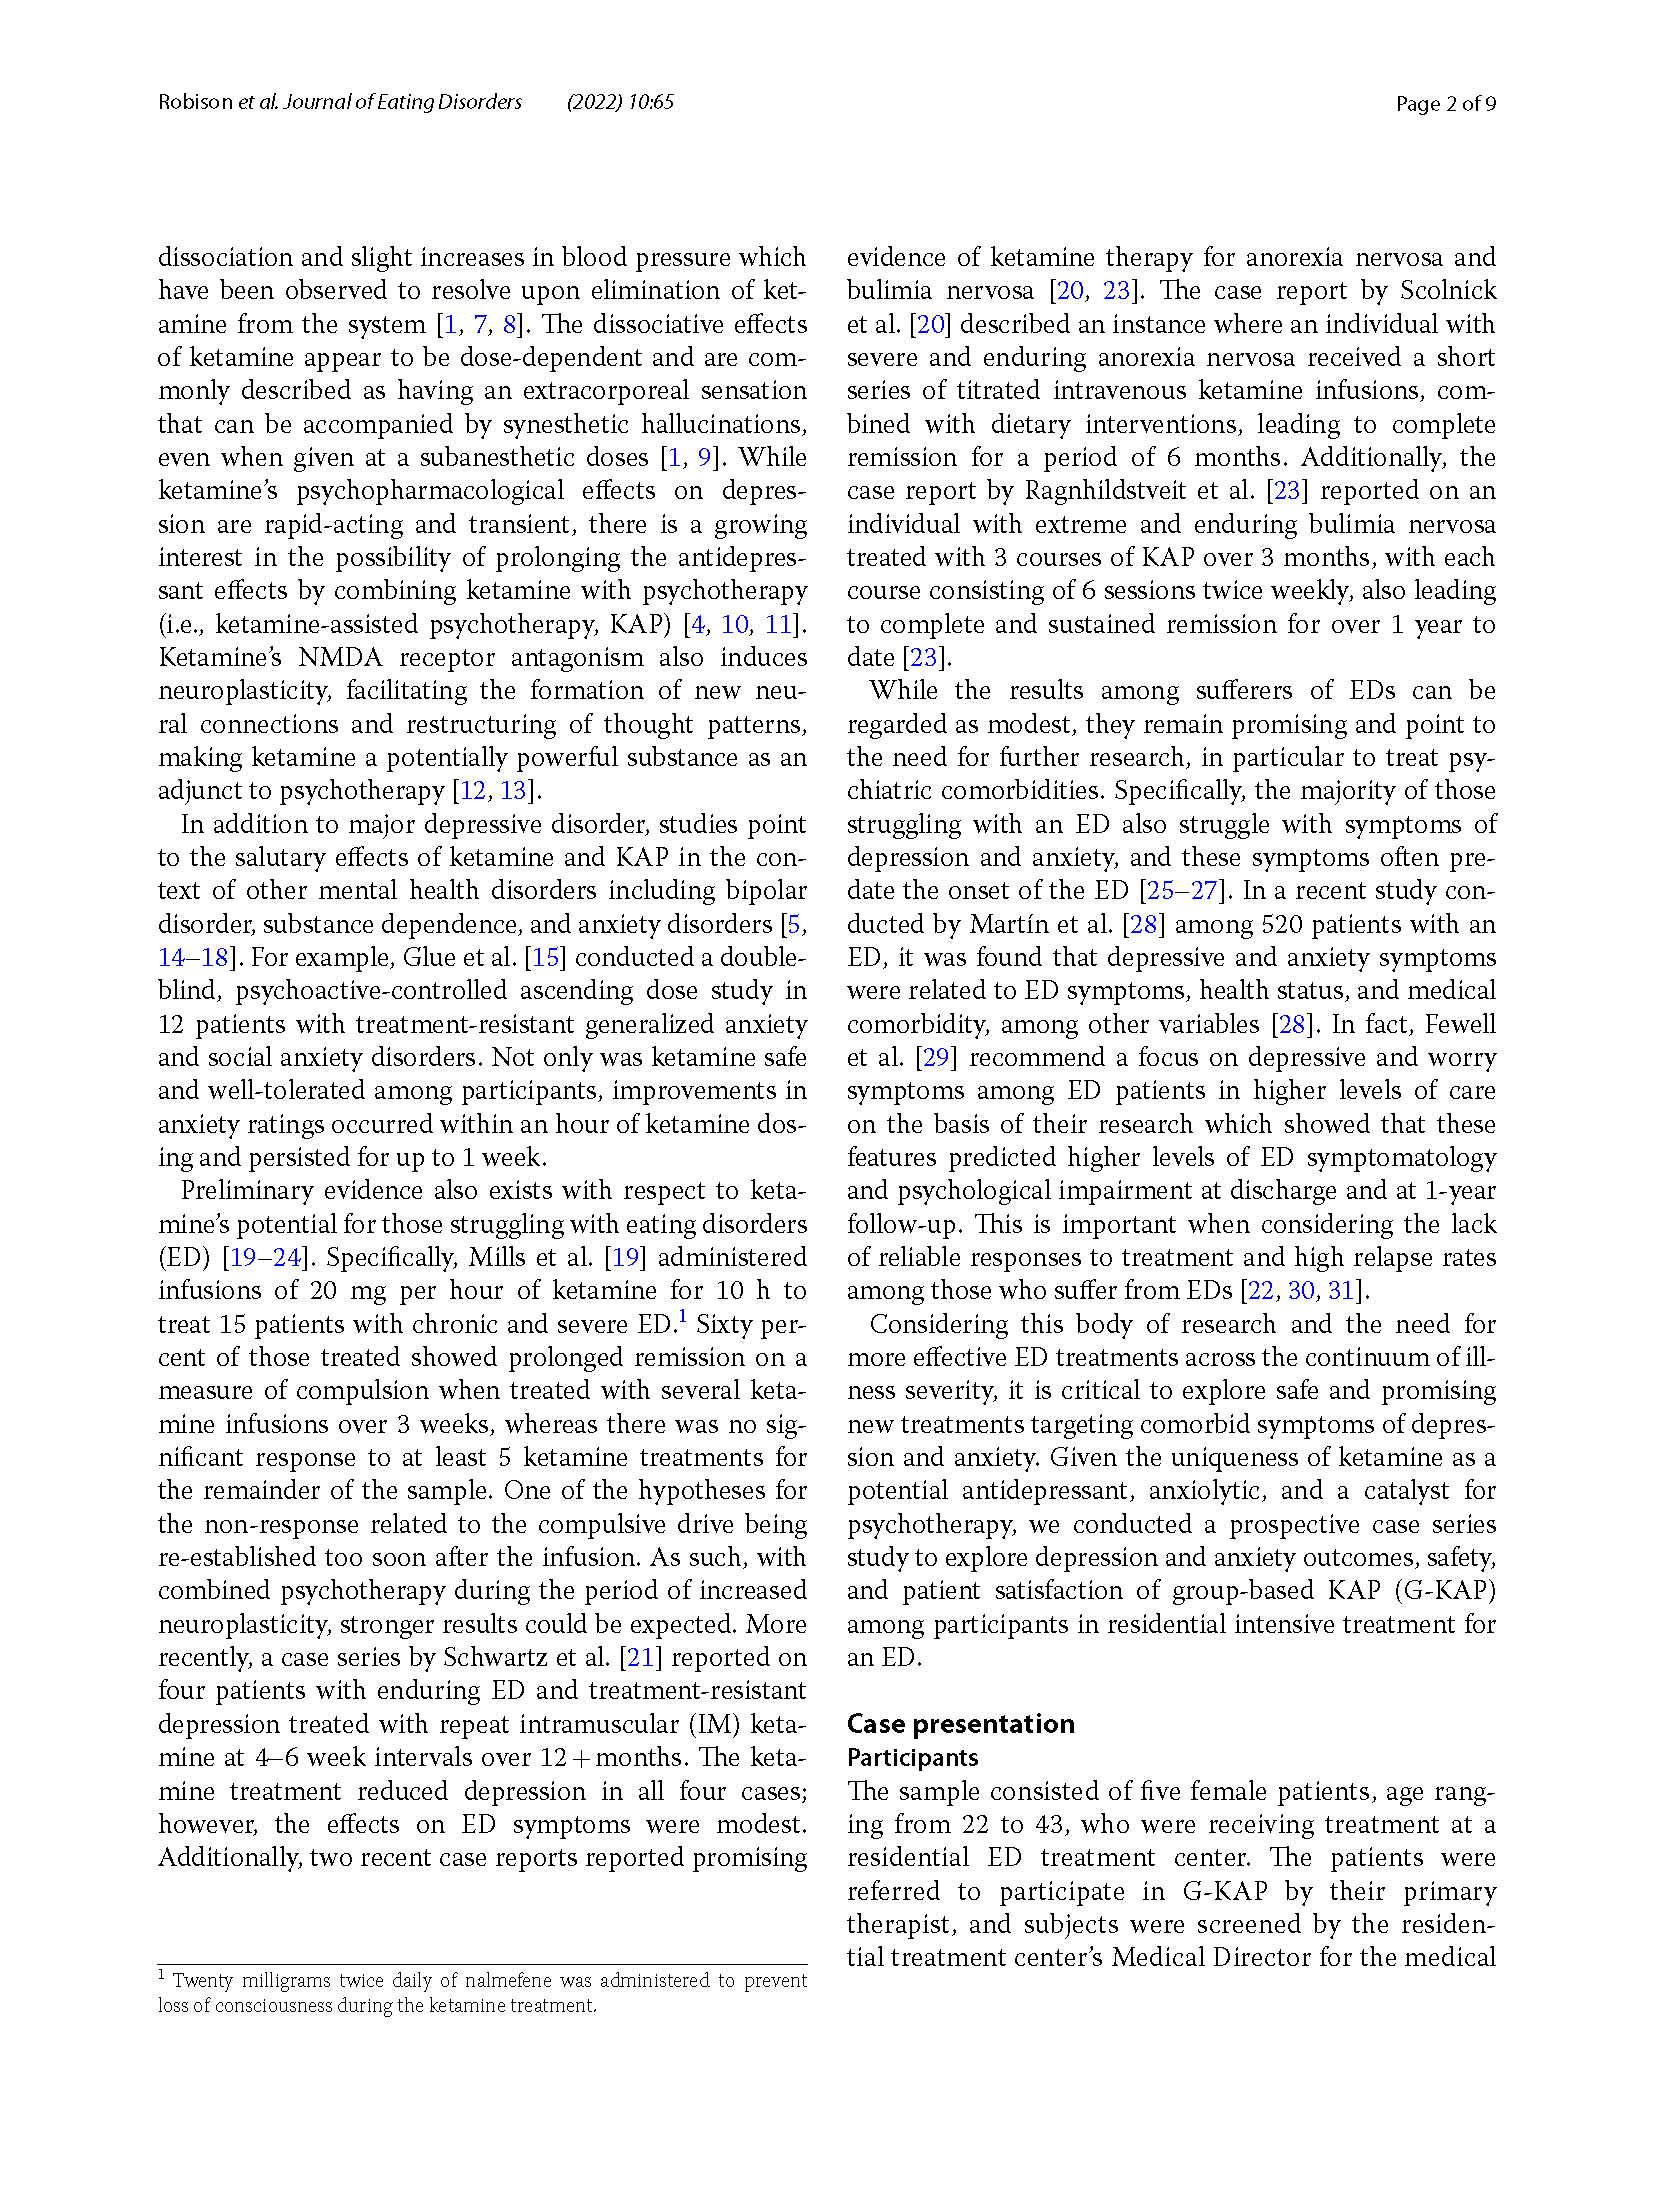 Group-based ketamine-assisted psychotherapy for patients in residential treatment for eating disorders with comorbid depression and anxiety disorders_Page_2.png